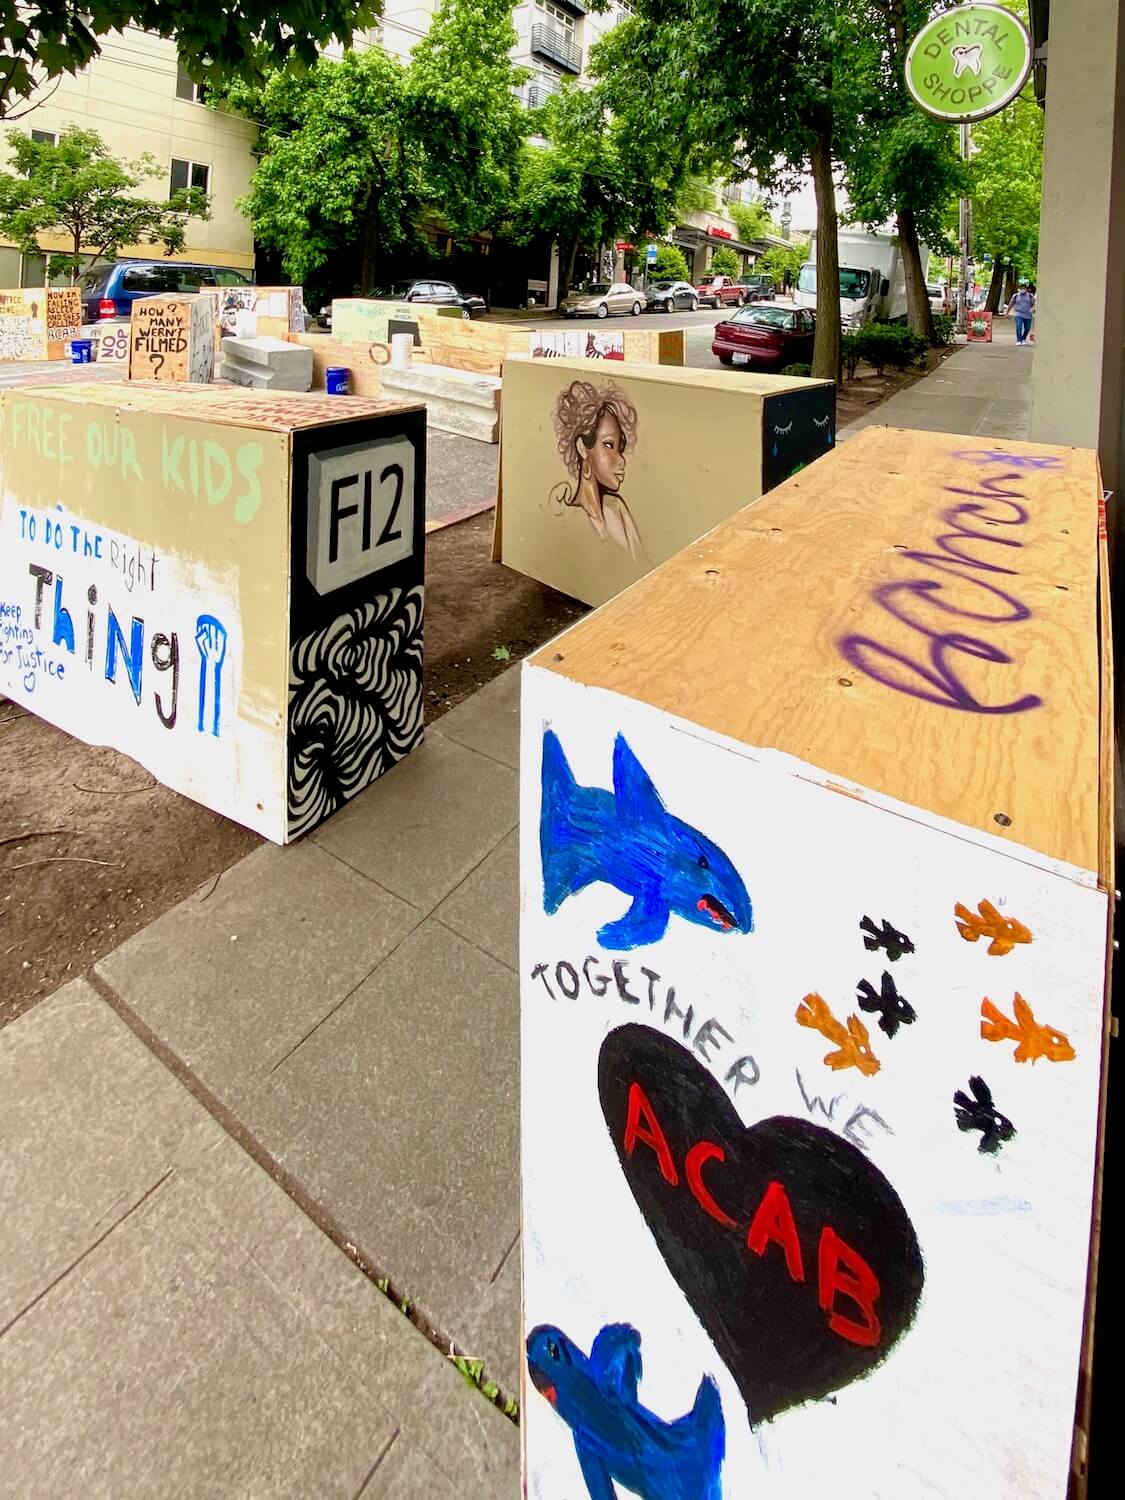 An array of traffic dividers are covered with plywood and painted with various messages about kids and acceptance. This area is on one side of the Capitol Hill protest zone in support of Black Lives Matter movement in Seattle.